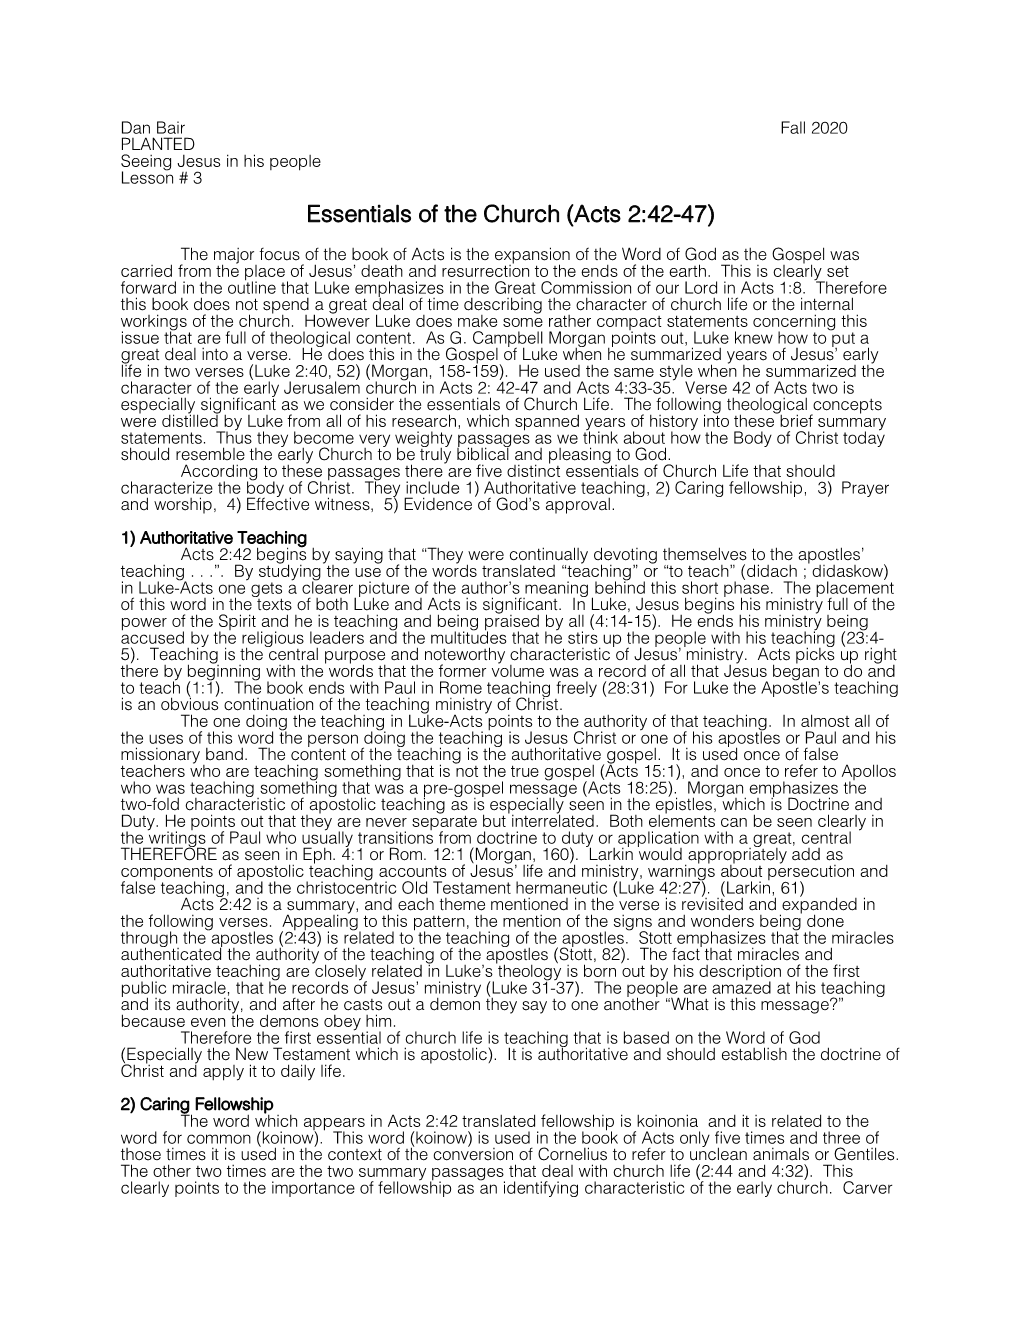 Essentials of the Church (Acts 2:42-47)